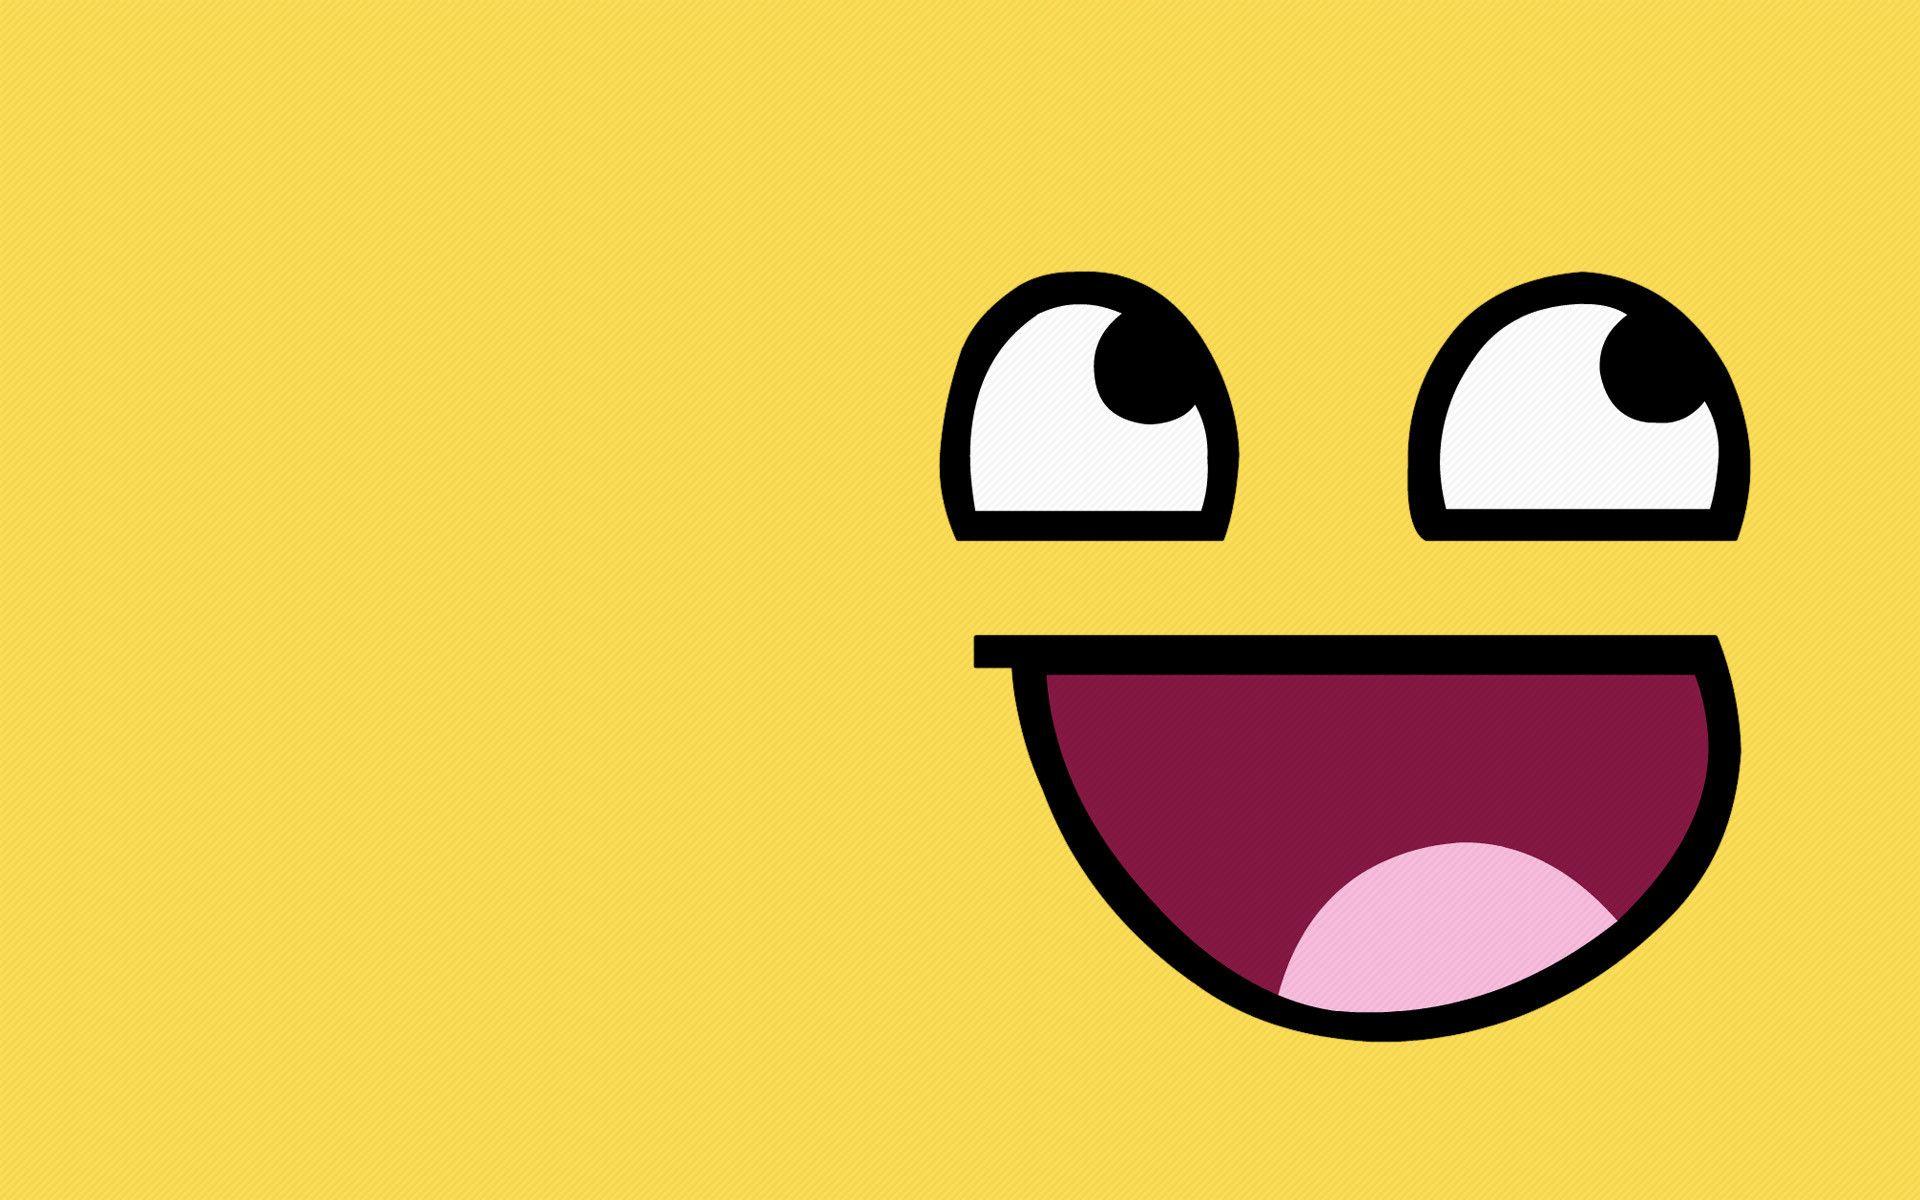 Awesome Smiley Face Wallpapers 1920x1200